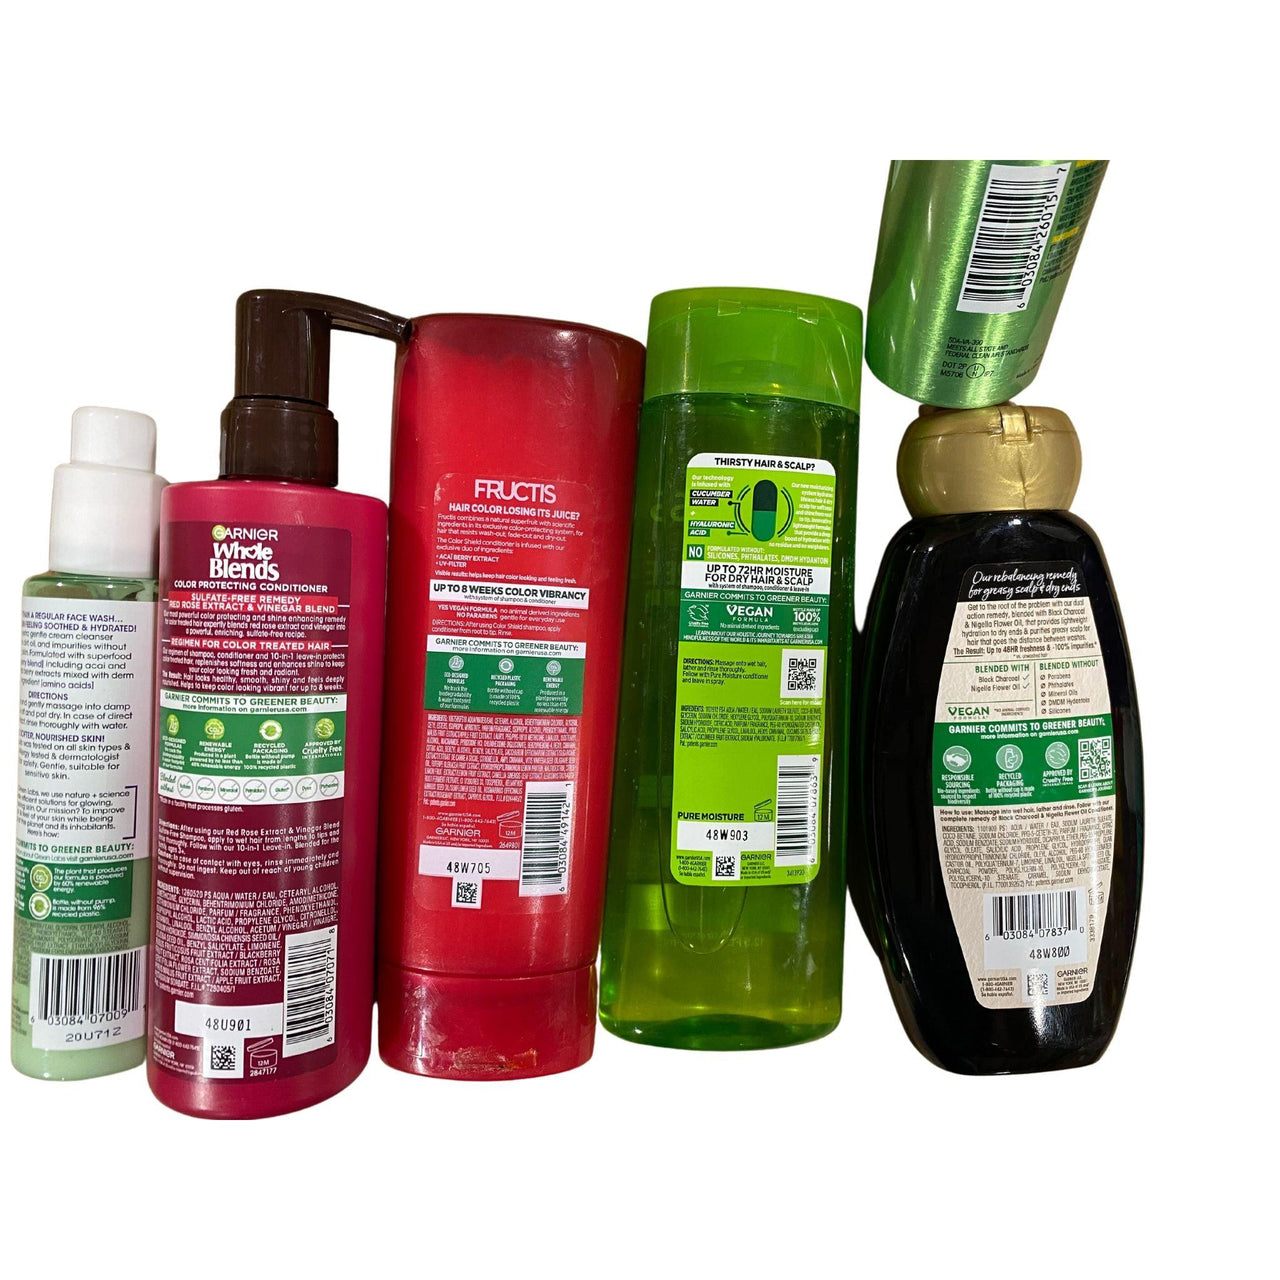 Assorted Hair Products - Shampoo, Dry Shampoo, Conditioner, Hairspray (50 Pcs Box) - Discount Wholesalers Inc